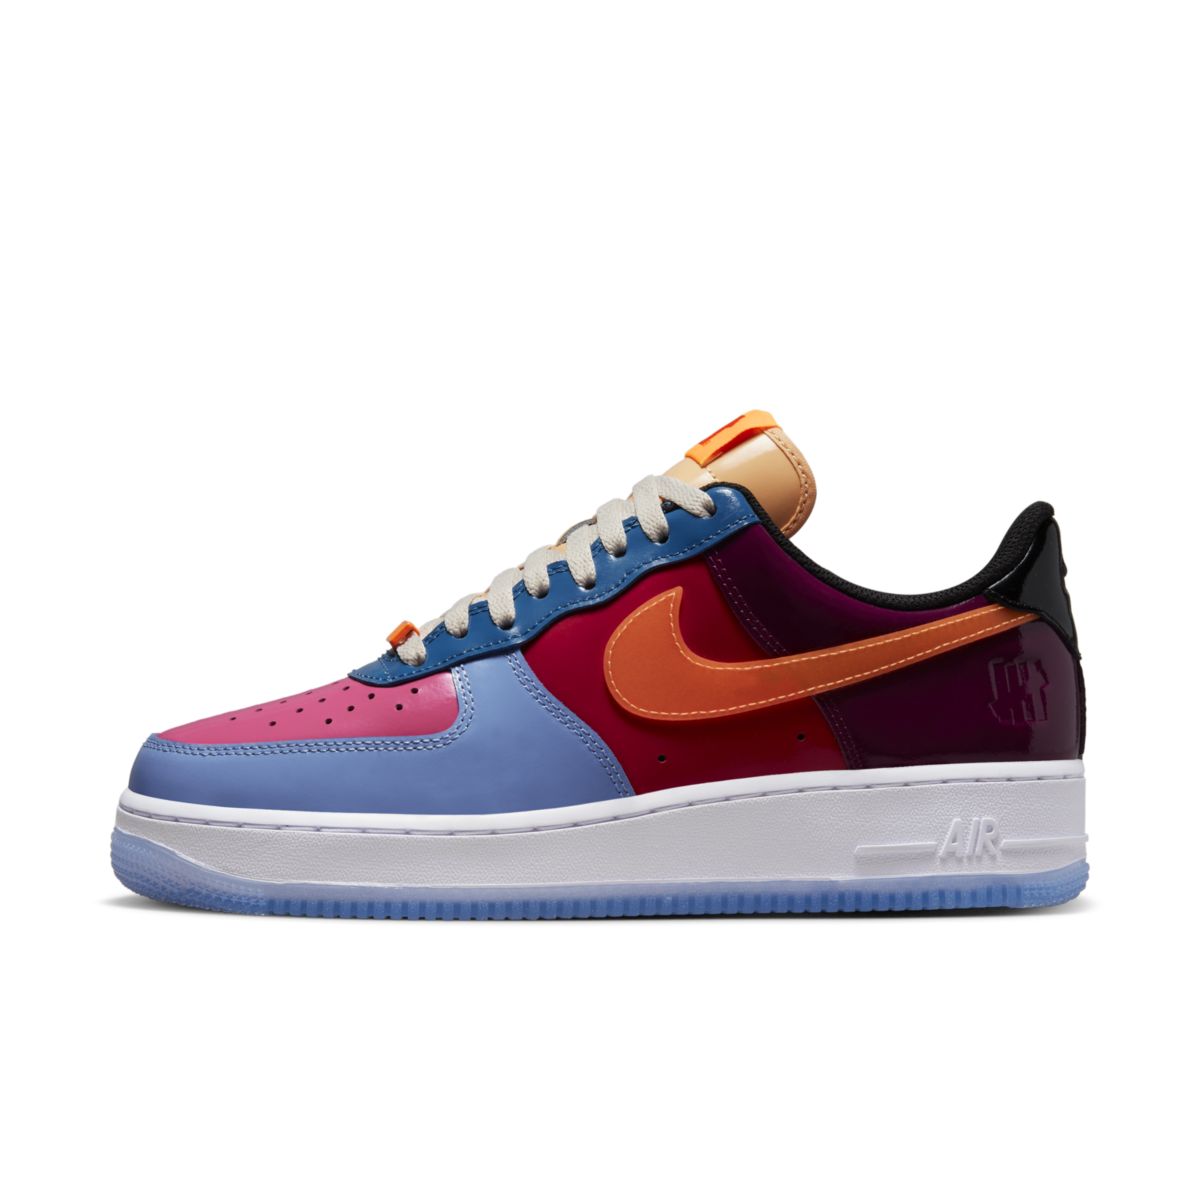 Undefeated x Nike Air Force 1 Low SP Total Orange DV5255-400 2